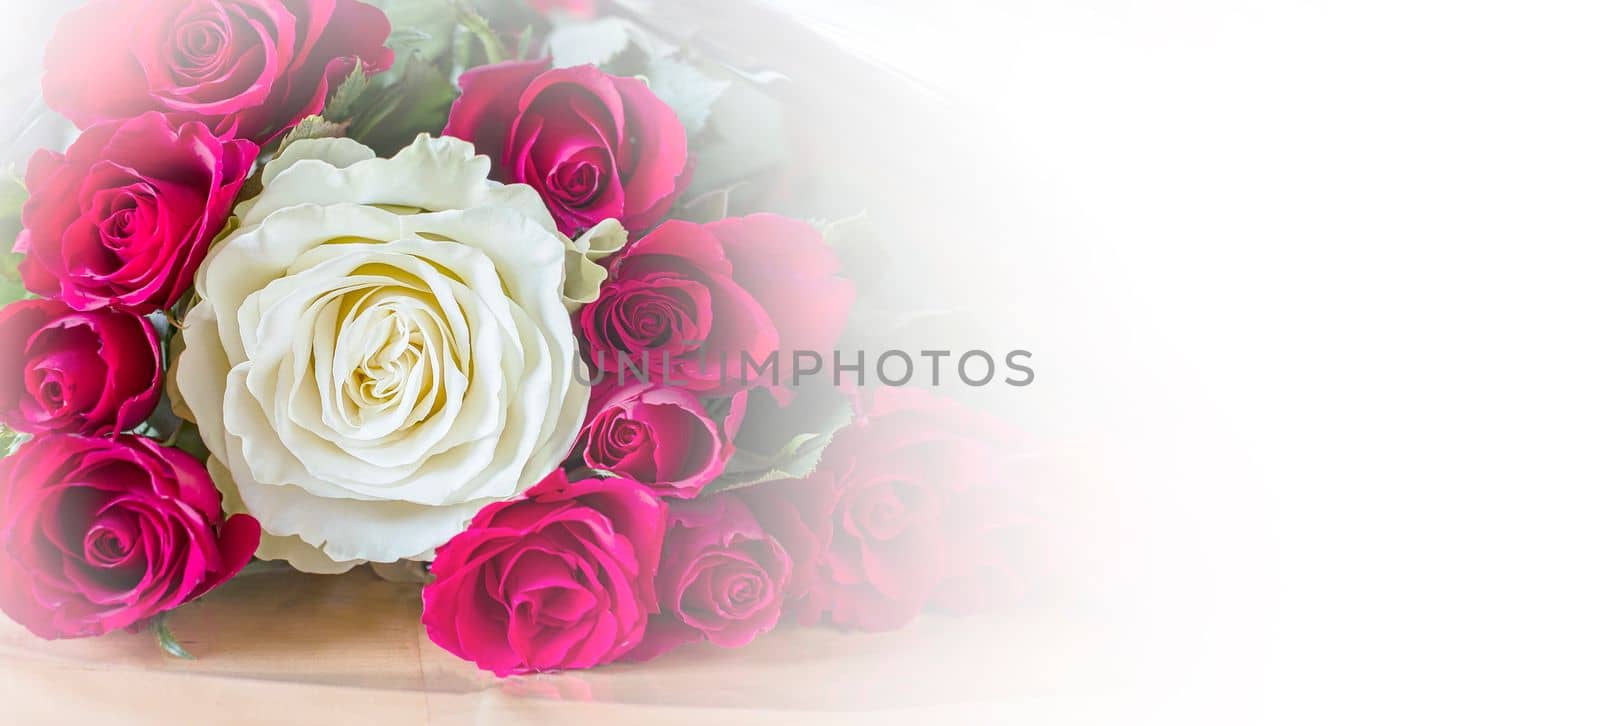 Beautiful bouquet of une white and red roses on table close-up by Annavish